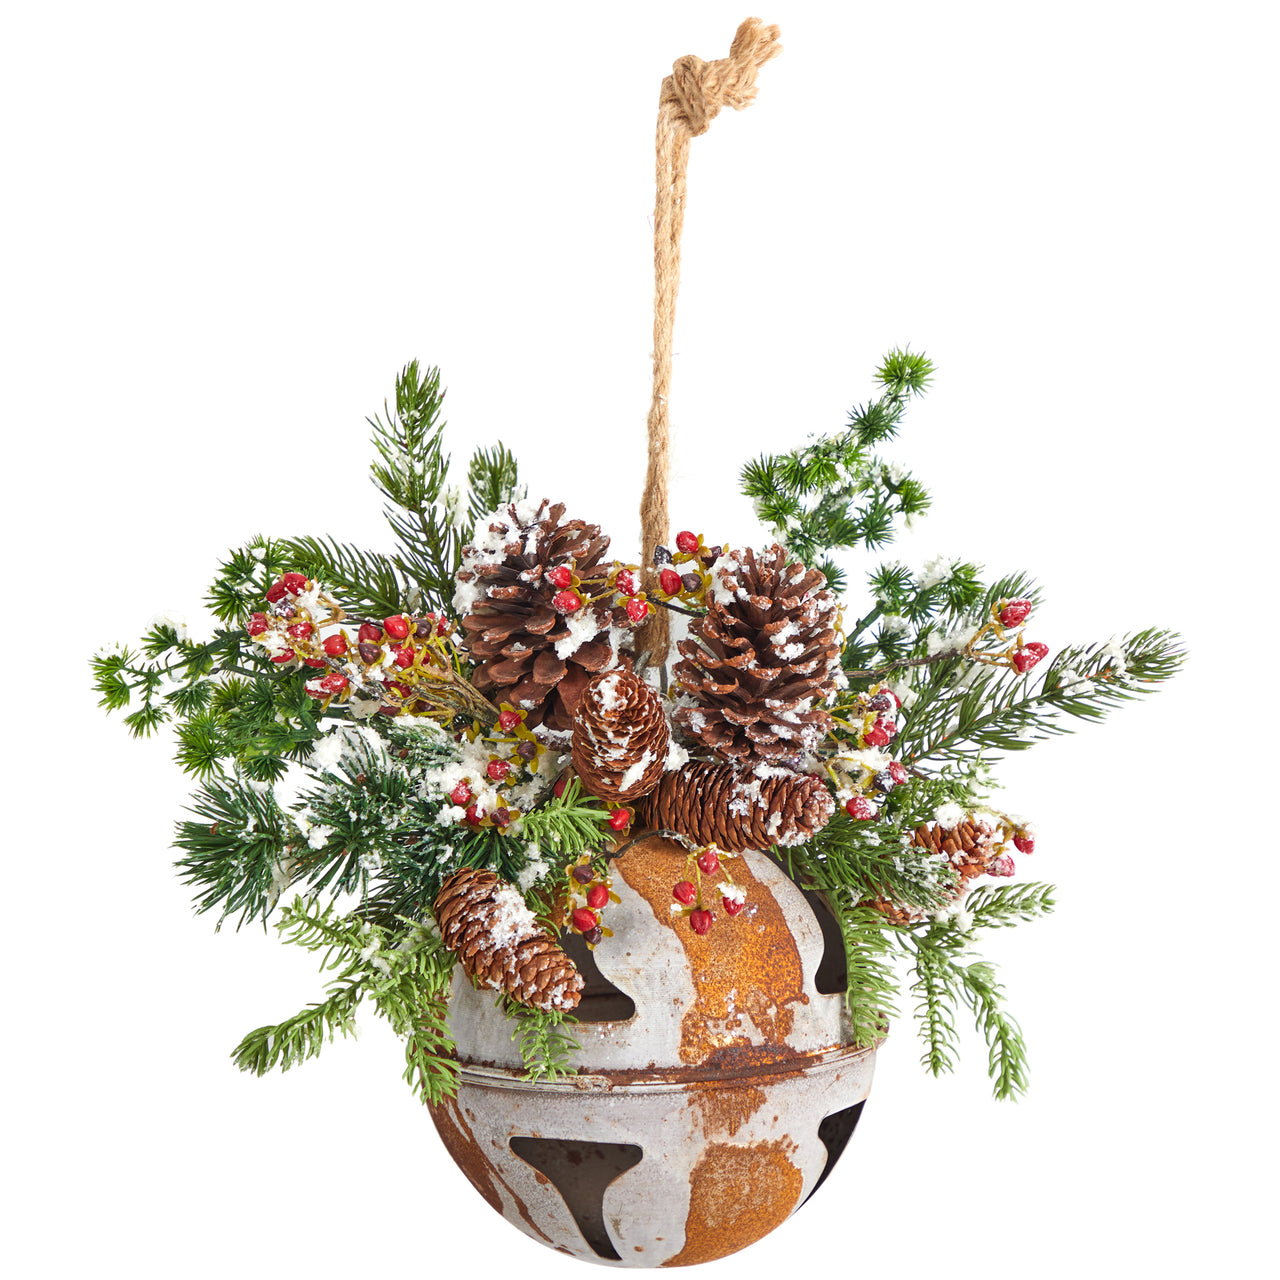 16” Holiday Christmas Jumbo Metal Bell Ornament With Artificial Holly, Berries And Pine